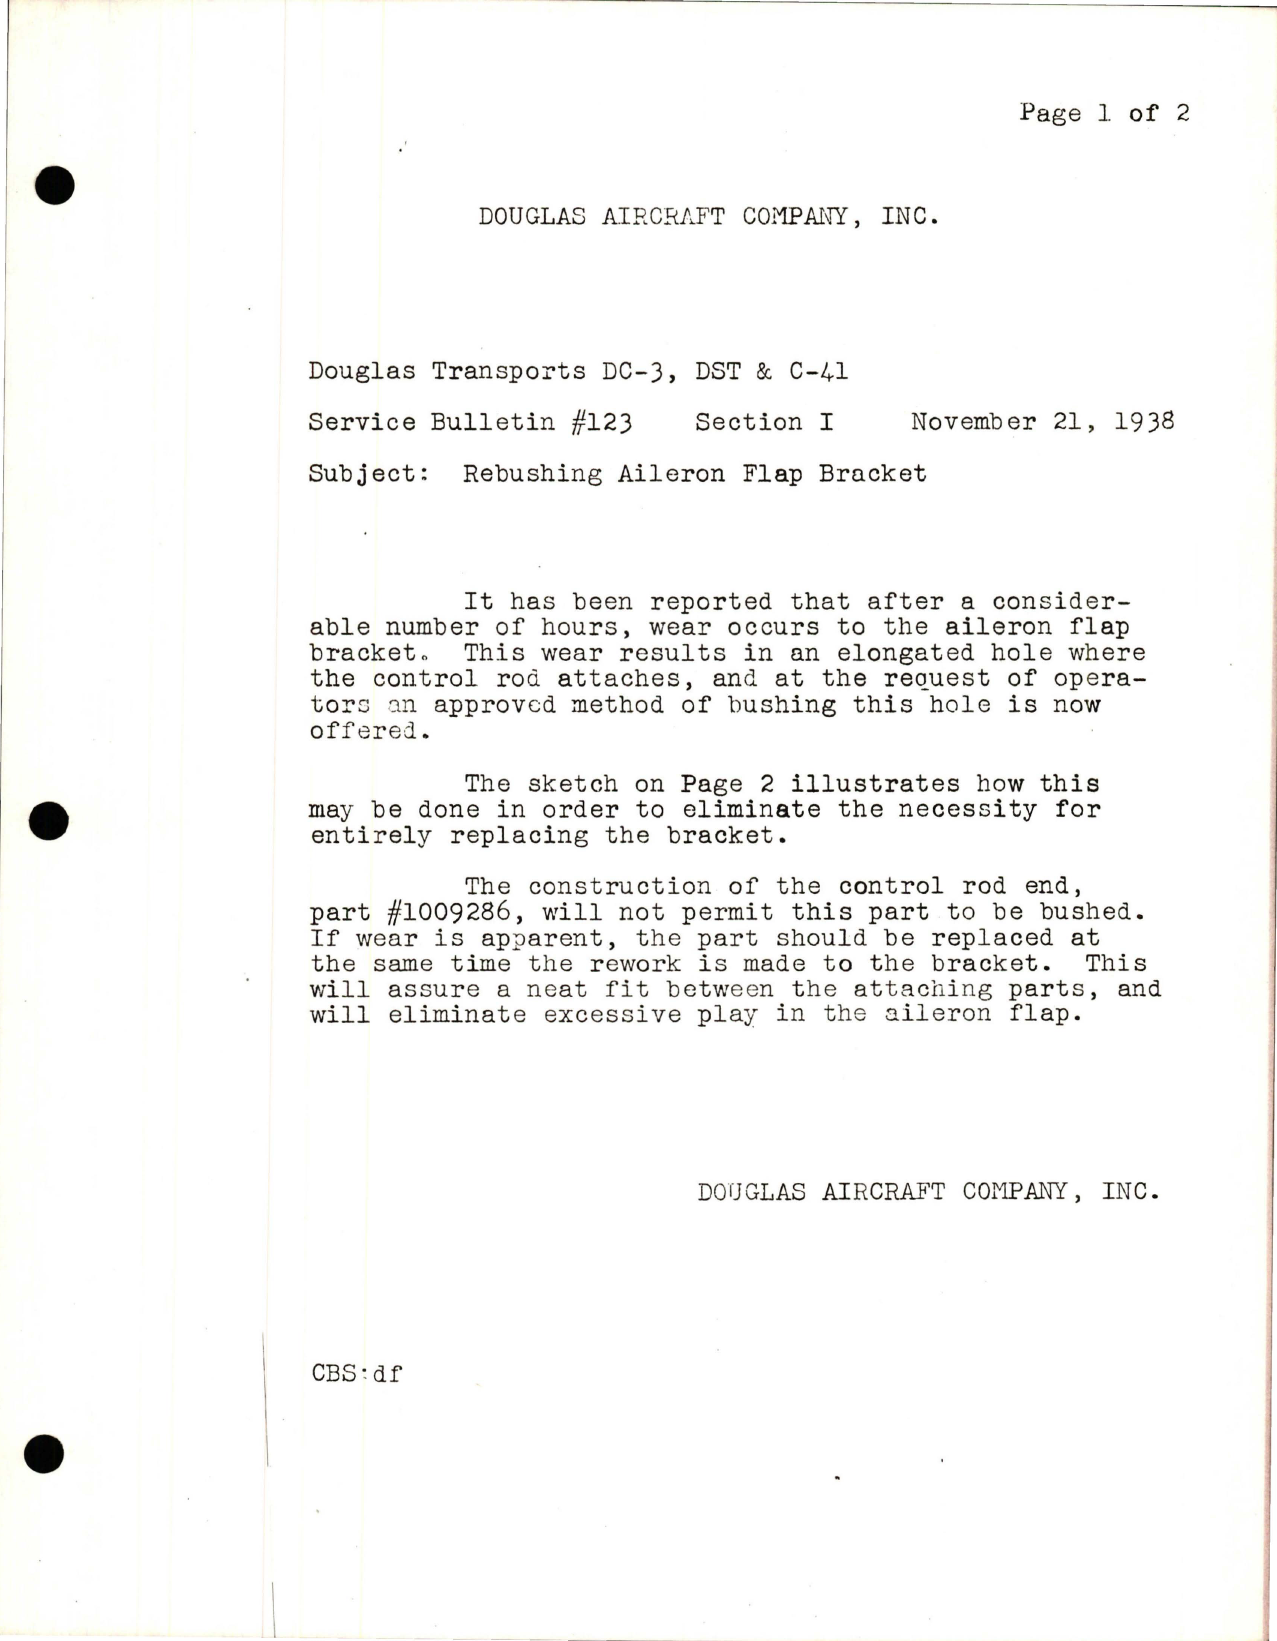 Sample page 1 from AirCorps Library document: Rebushing Aileron Flap Bracket